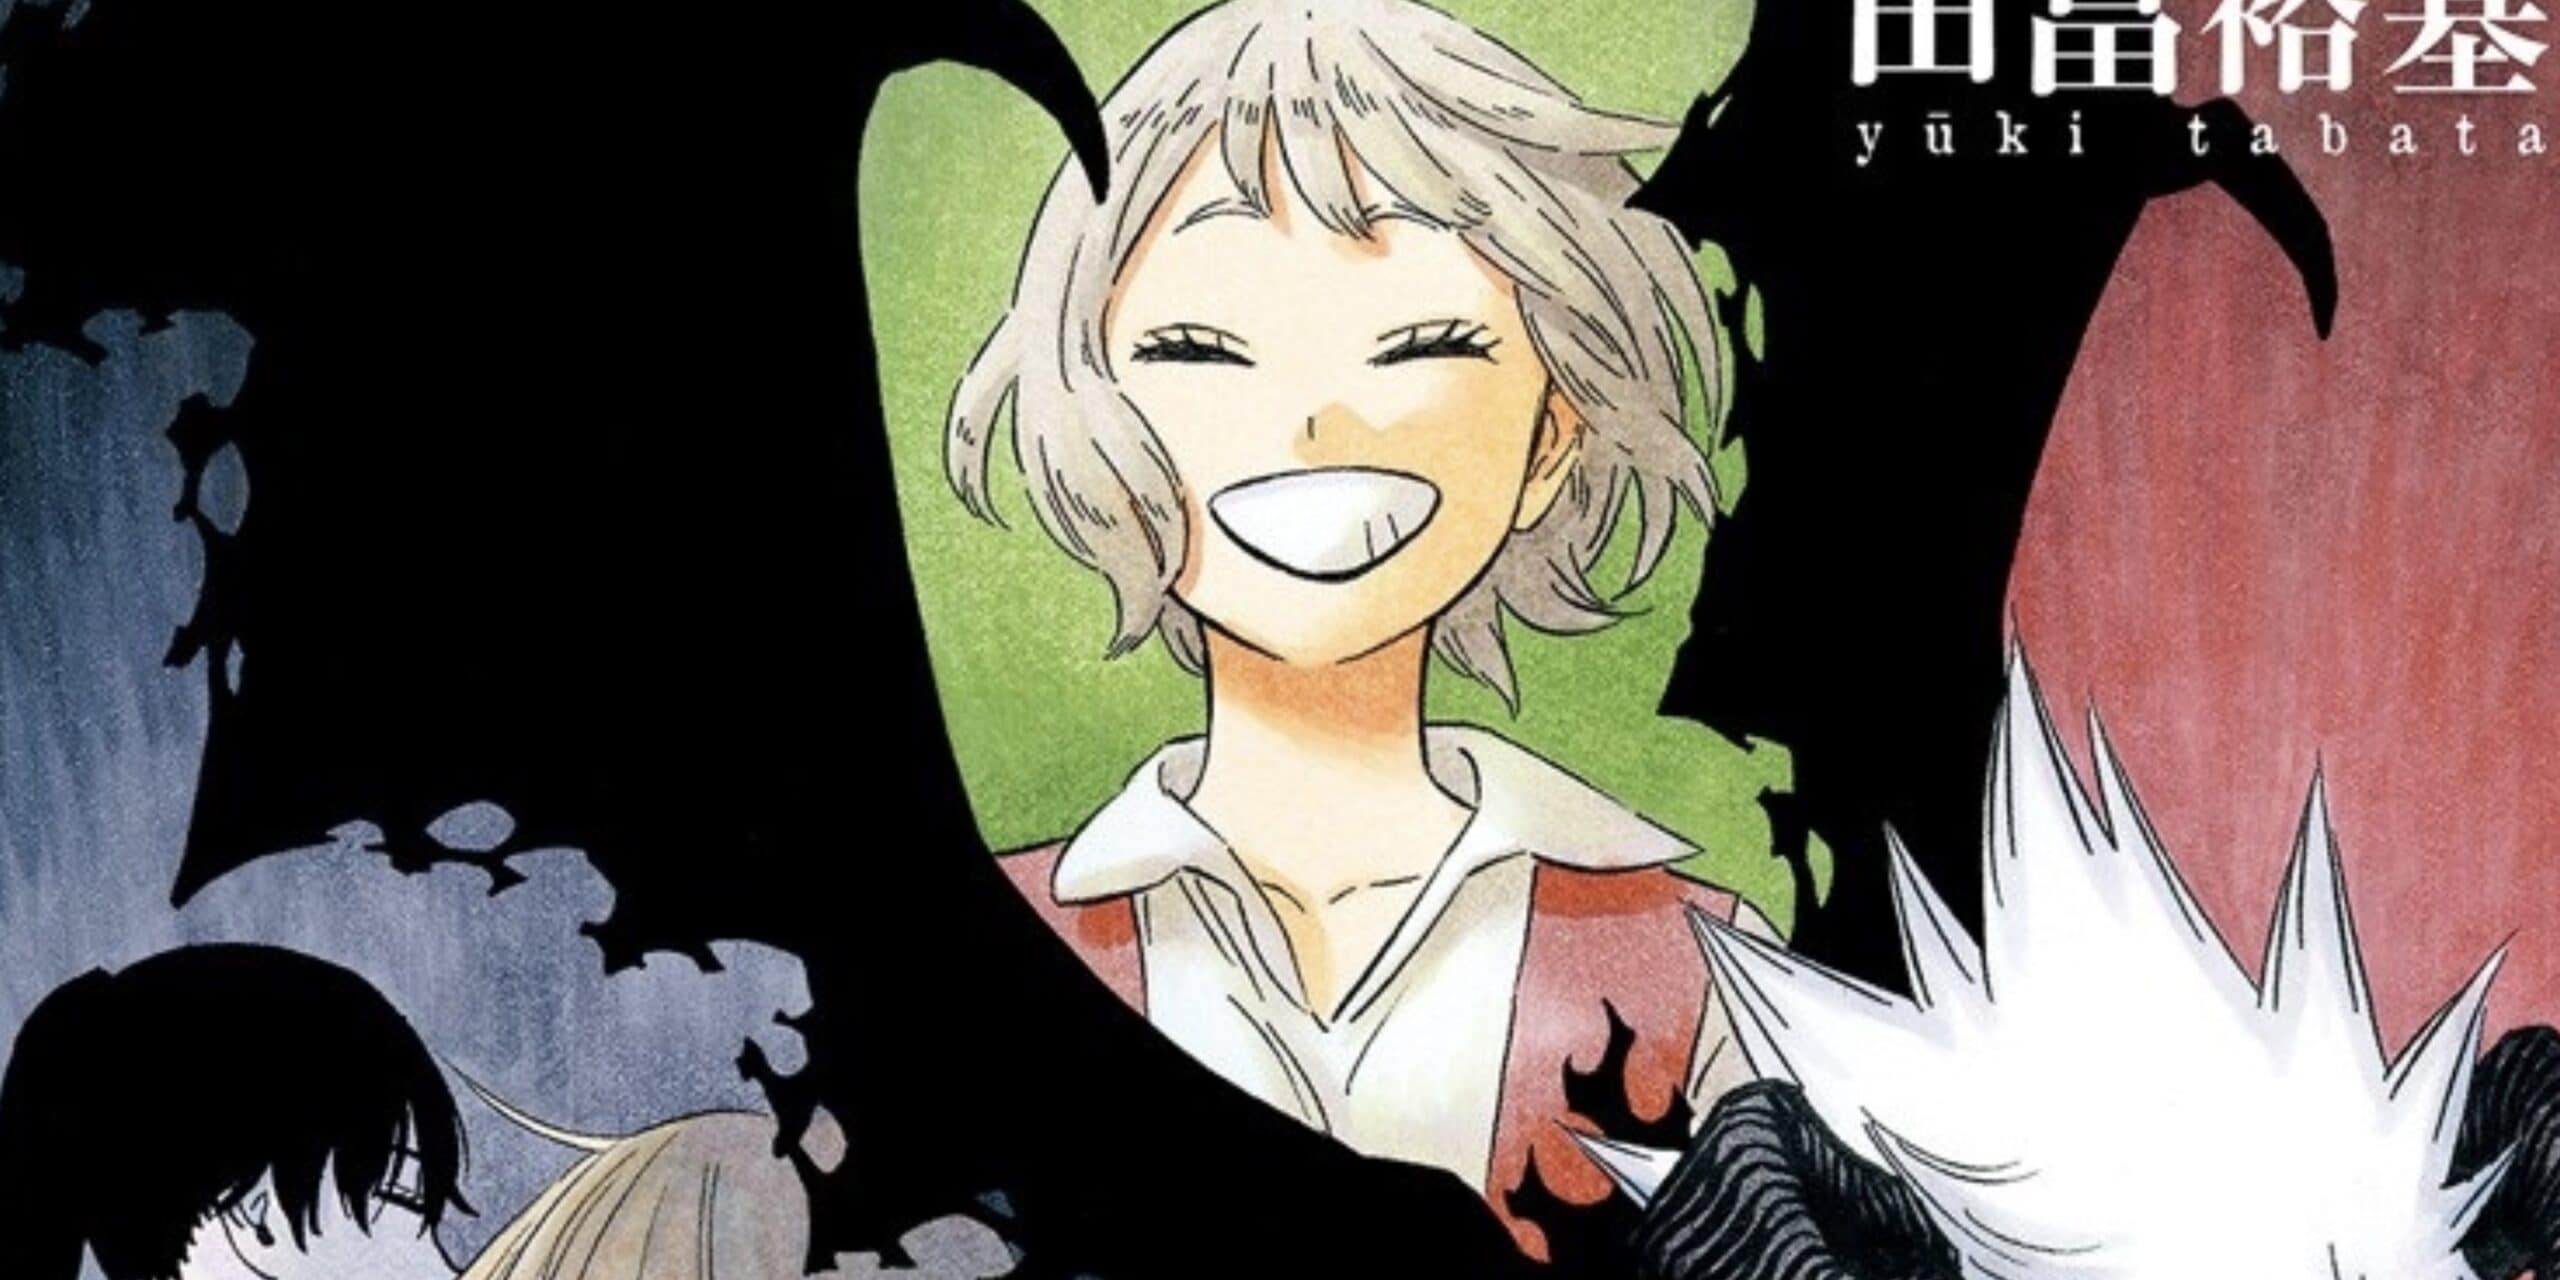 Black Clover Fans Express Disappointment Over New Chapter Announcement, Concerned About Series' Future